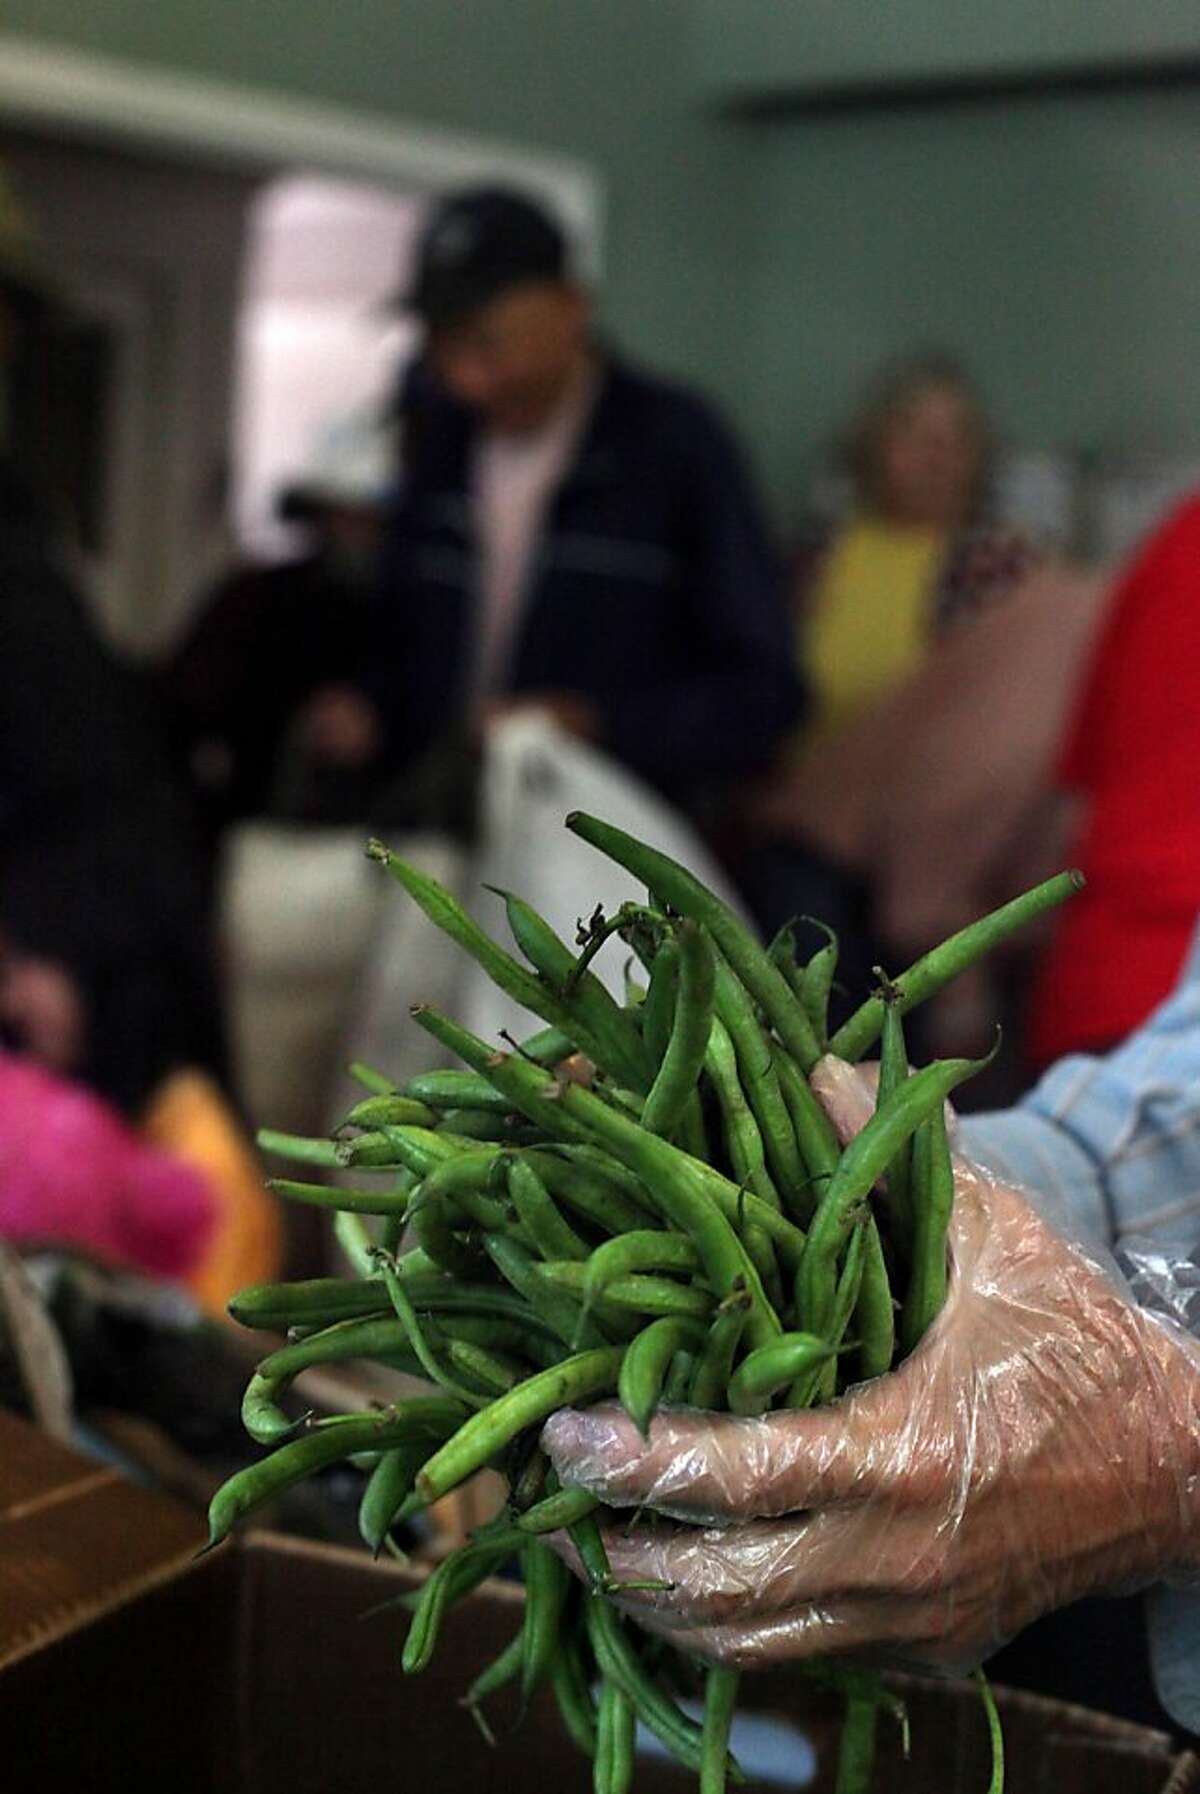 A volunteer prepares to pass out handfuls of green beans at Hosana Celebration Center on Tuesday, August 9, 2011 in San Francisco, Calif. The food is provided to the center by the San Francisco Food Bank.